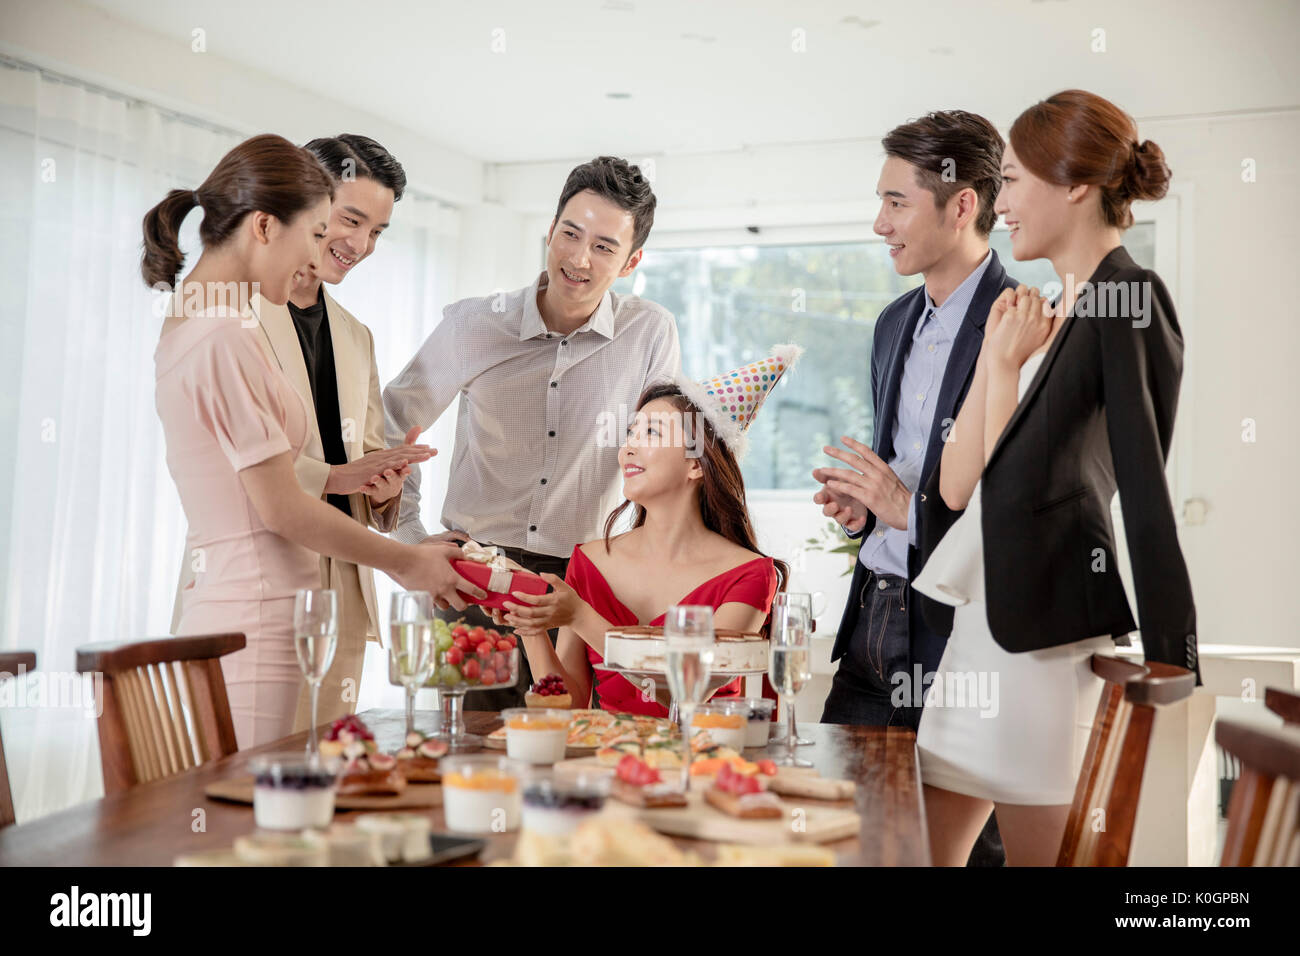 Young smiling friends having a birthday party for a woman Stock Photo